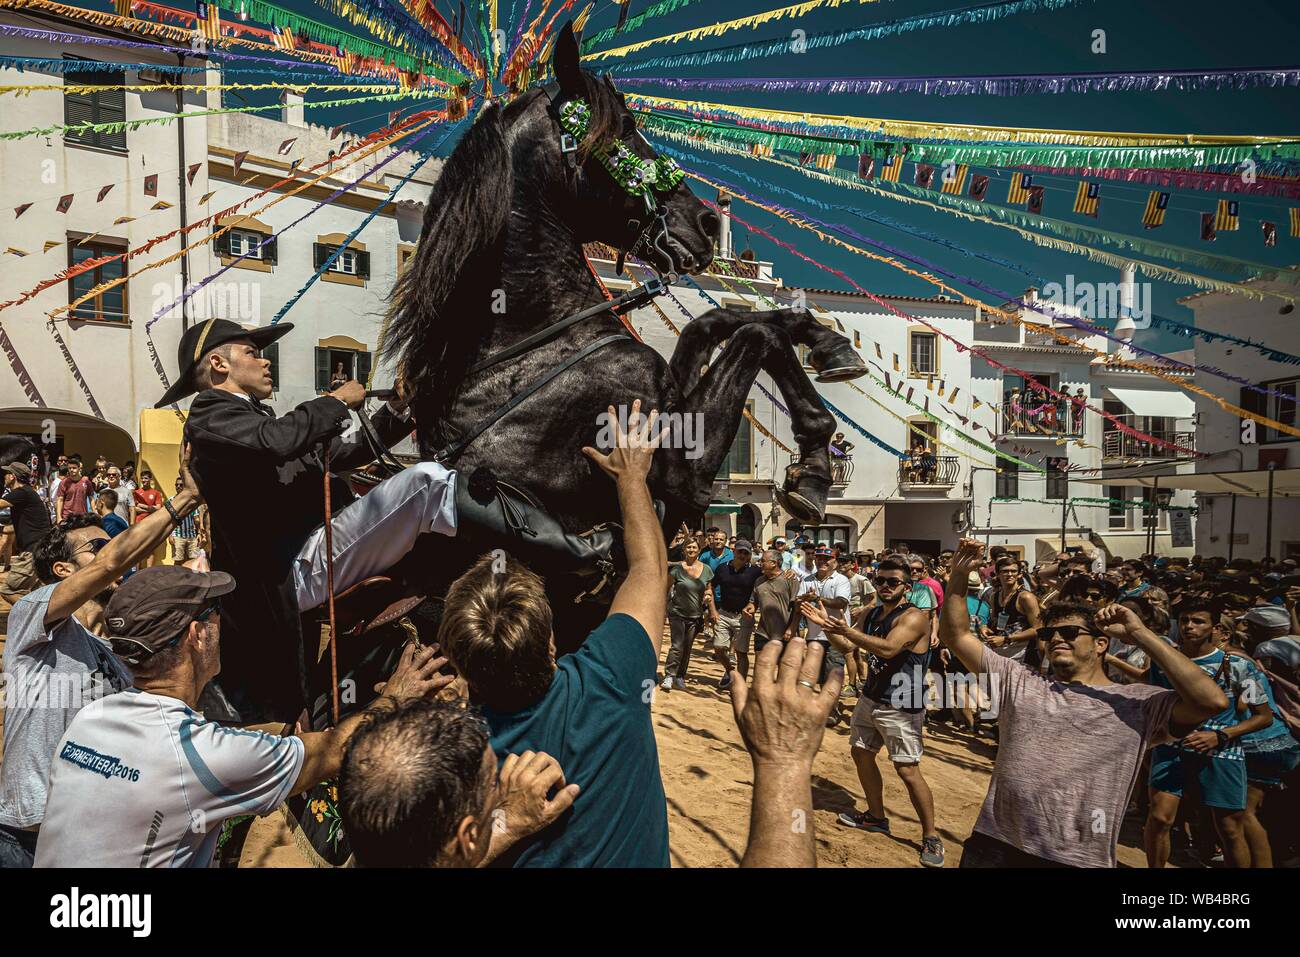 Ferreries, Spain. 24th Aug, 2019. A 'caixer' (horse rider) rears up on his horse surrounded by a cheering crowd during the traditional 'Jaleo' at the Sant Bartomeu Festival in Ferreries. Credit: Matthias Oesterle/Alamy Live News Stock Photo